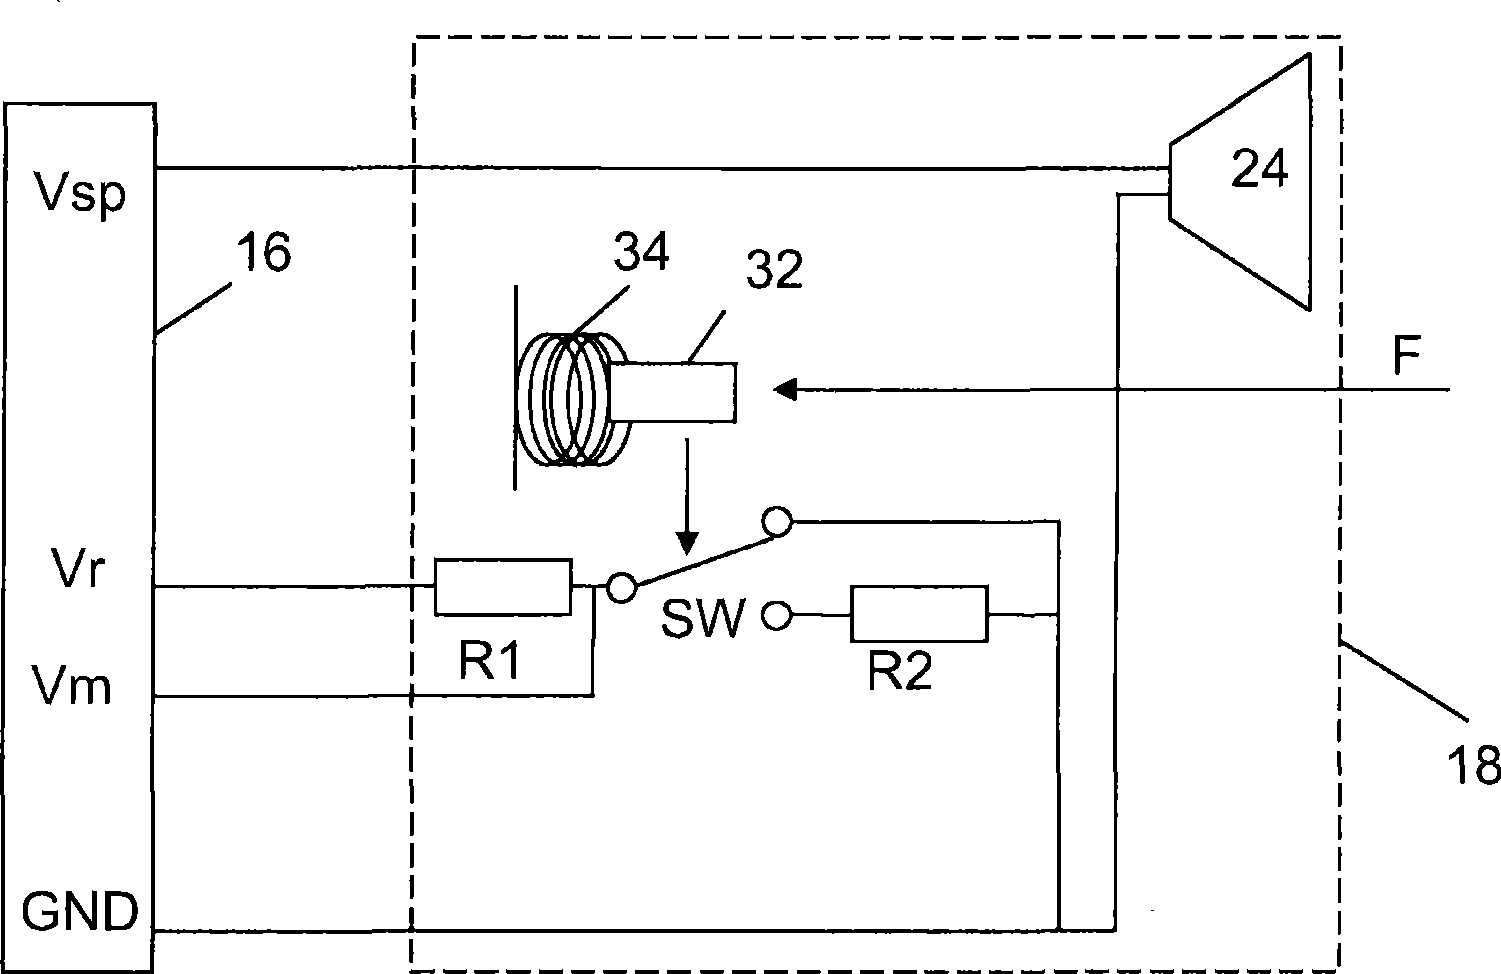 Sound output selection in relation to an accessory